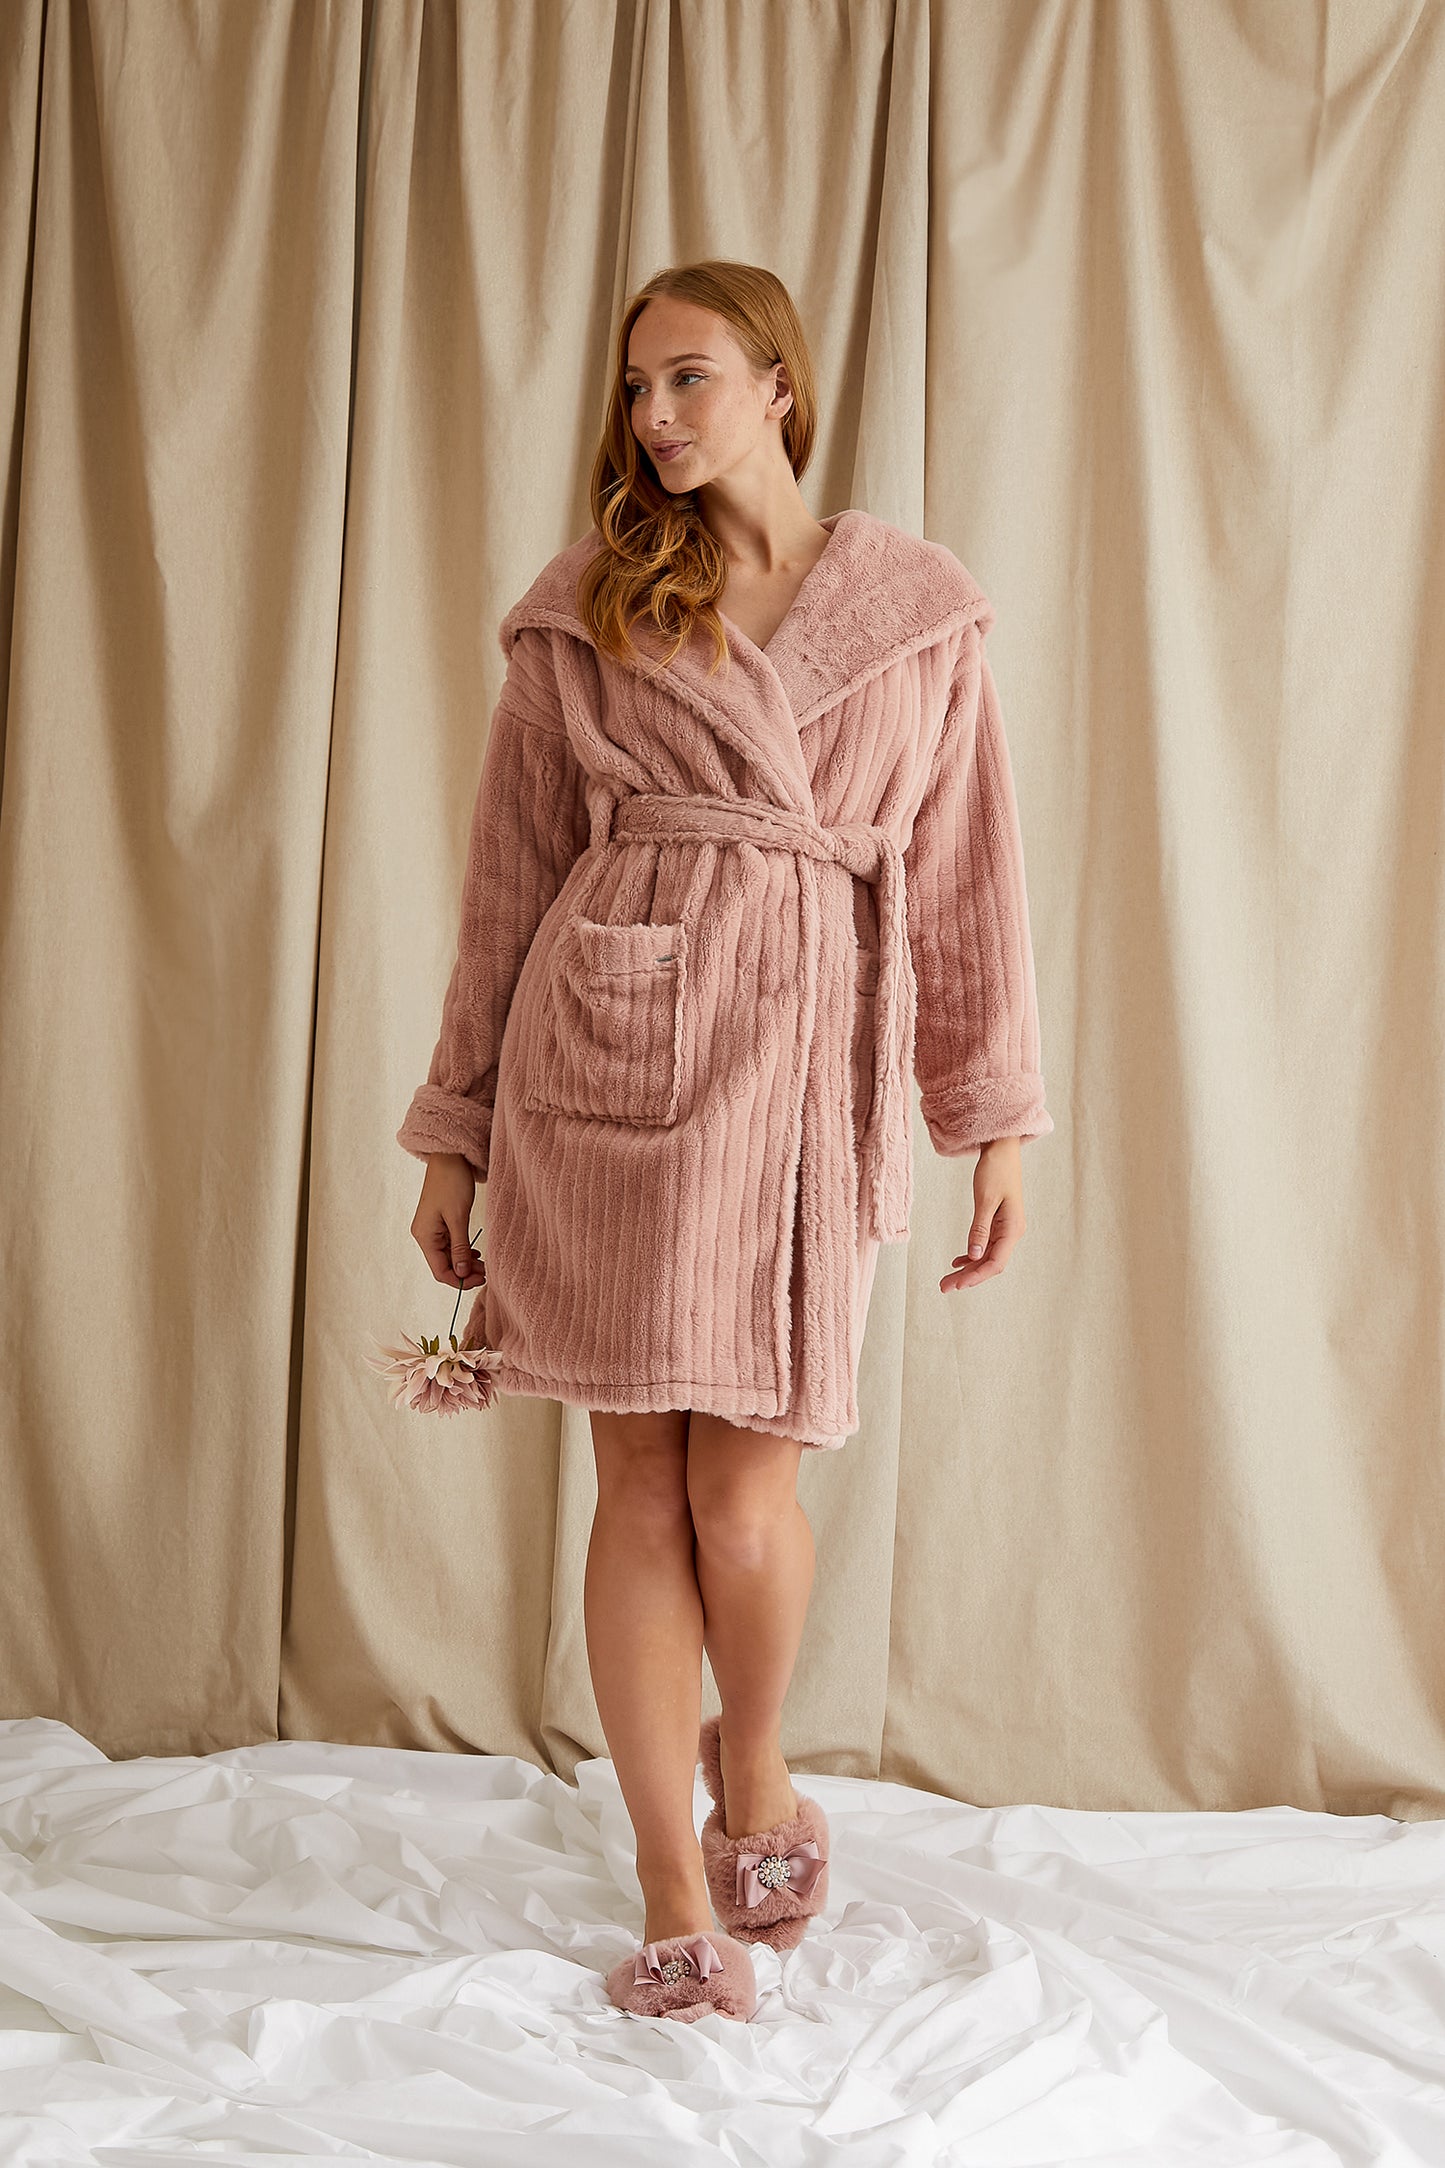 Women's Cloud Robe Dressing Gown in Dusky Pink with oversized hood from Pretty You London